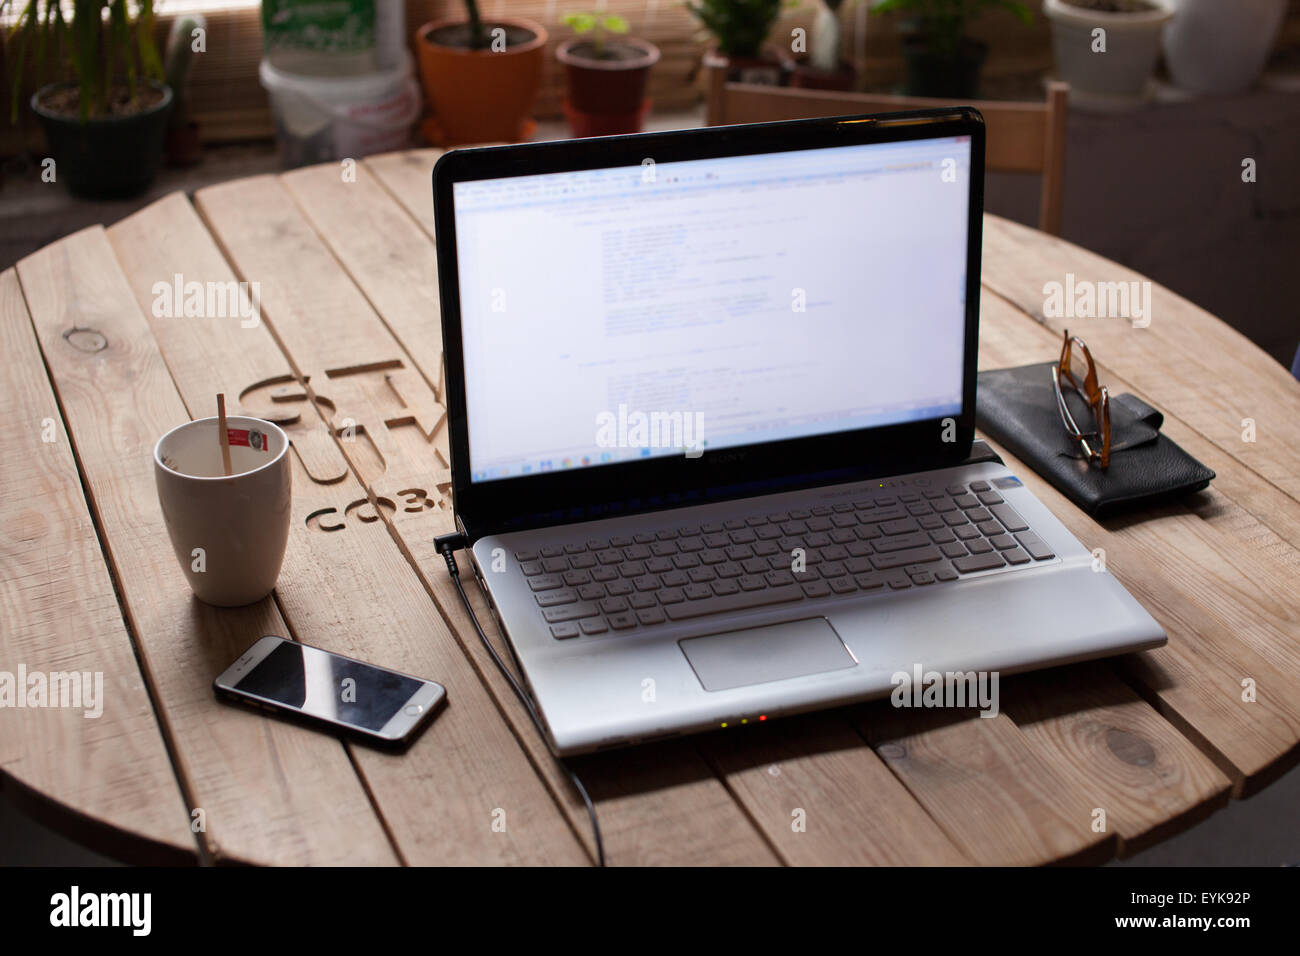 Wooden table with laptop, glasses, wallet and cup of coffee Stock Photo